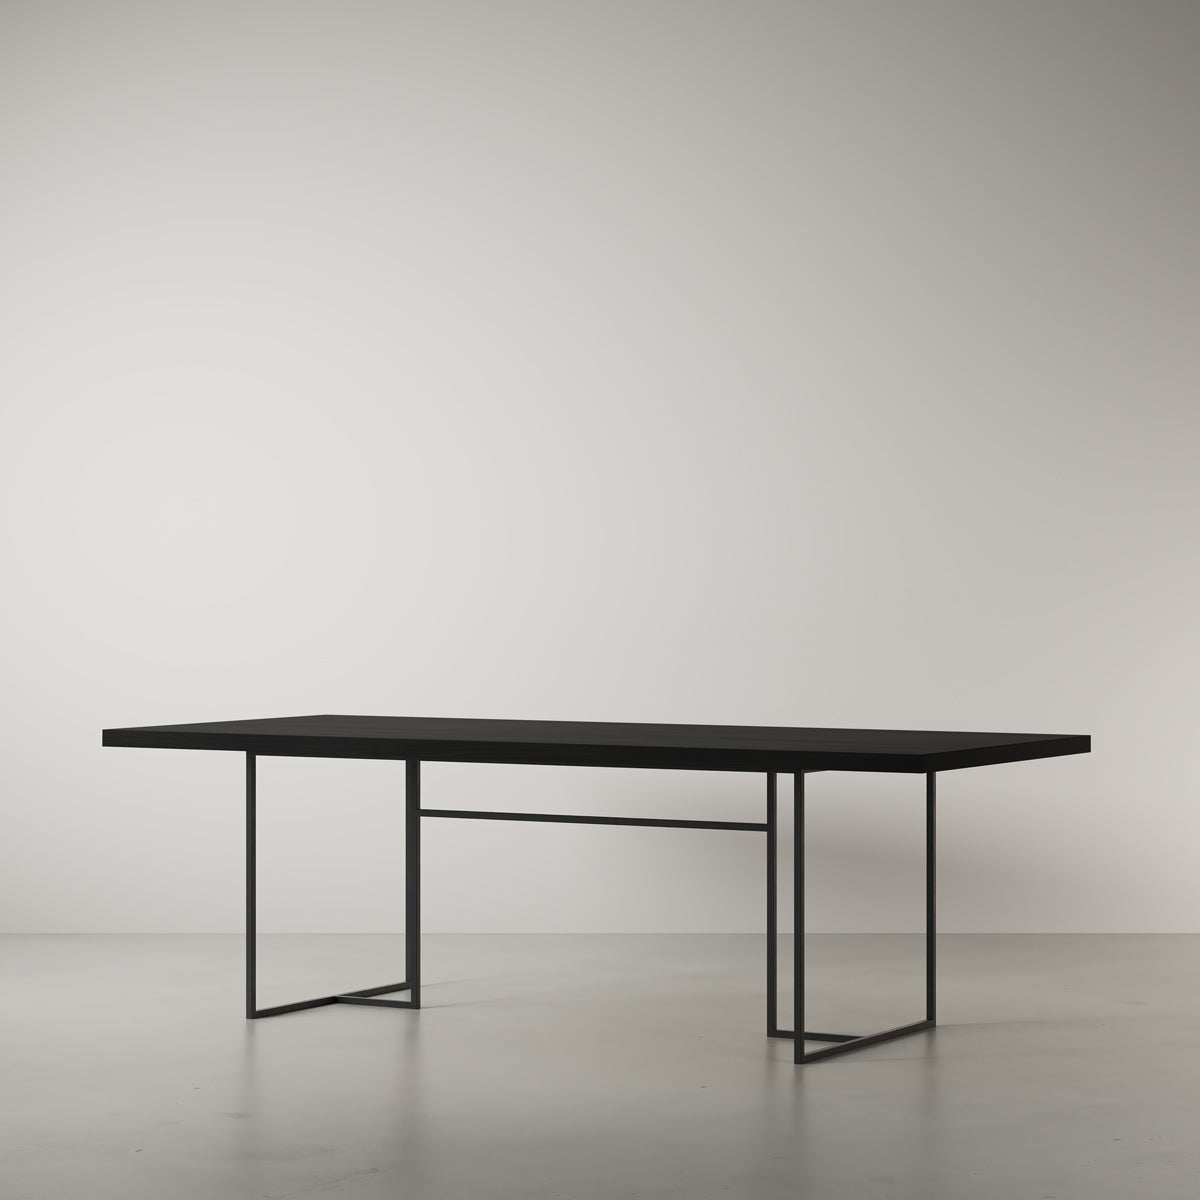 Emerson Dining Table